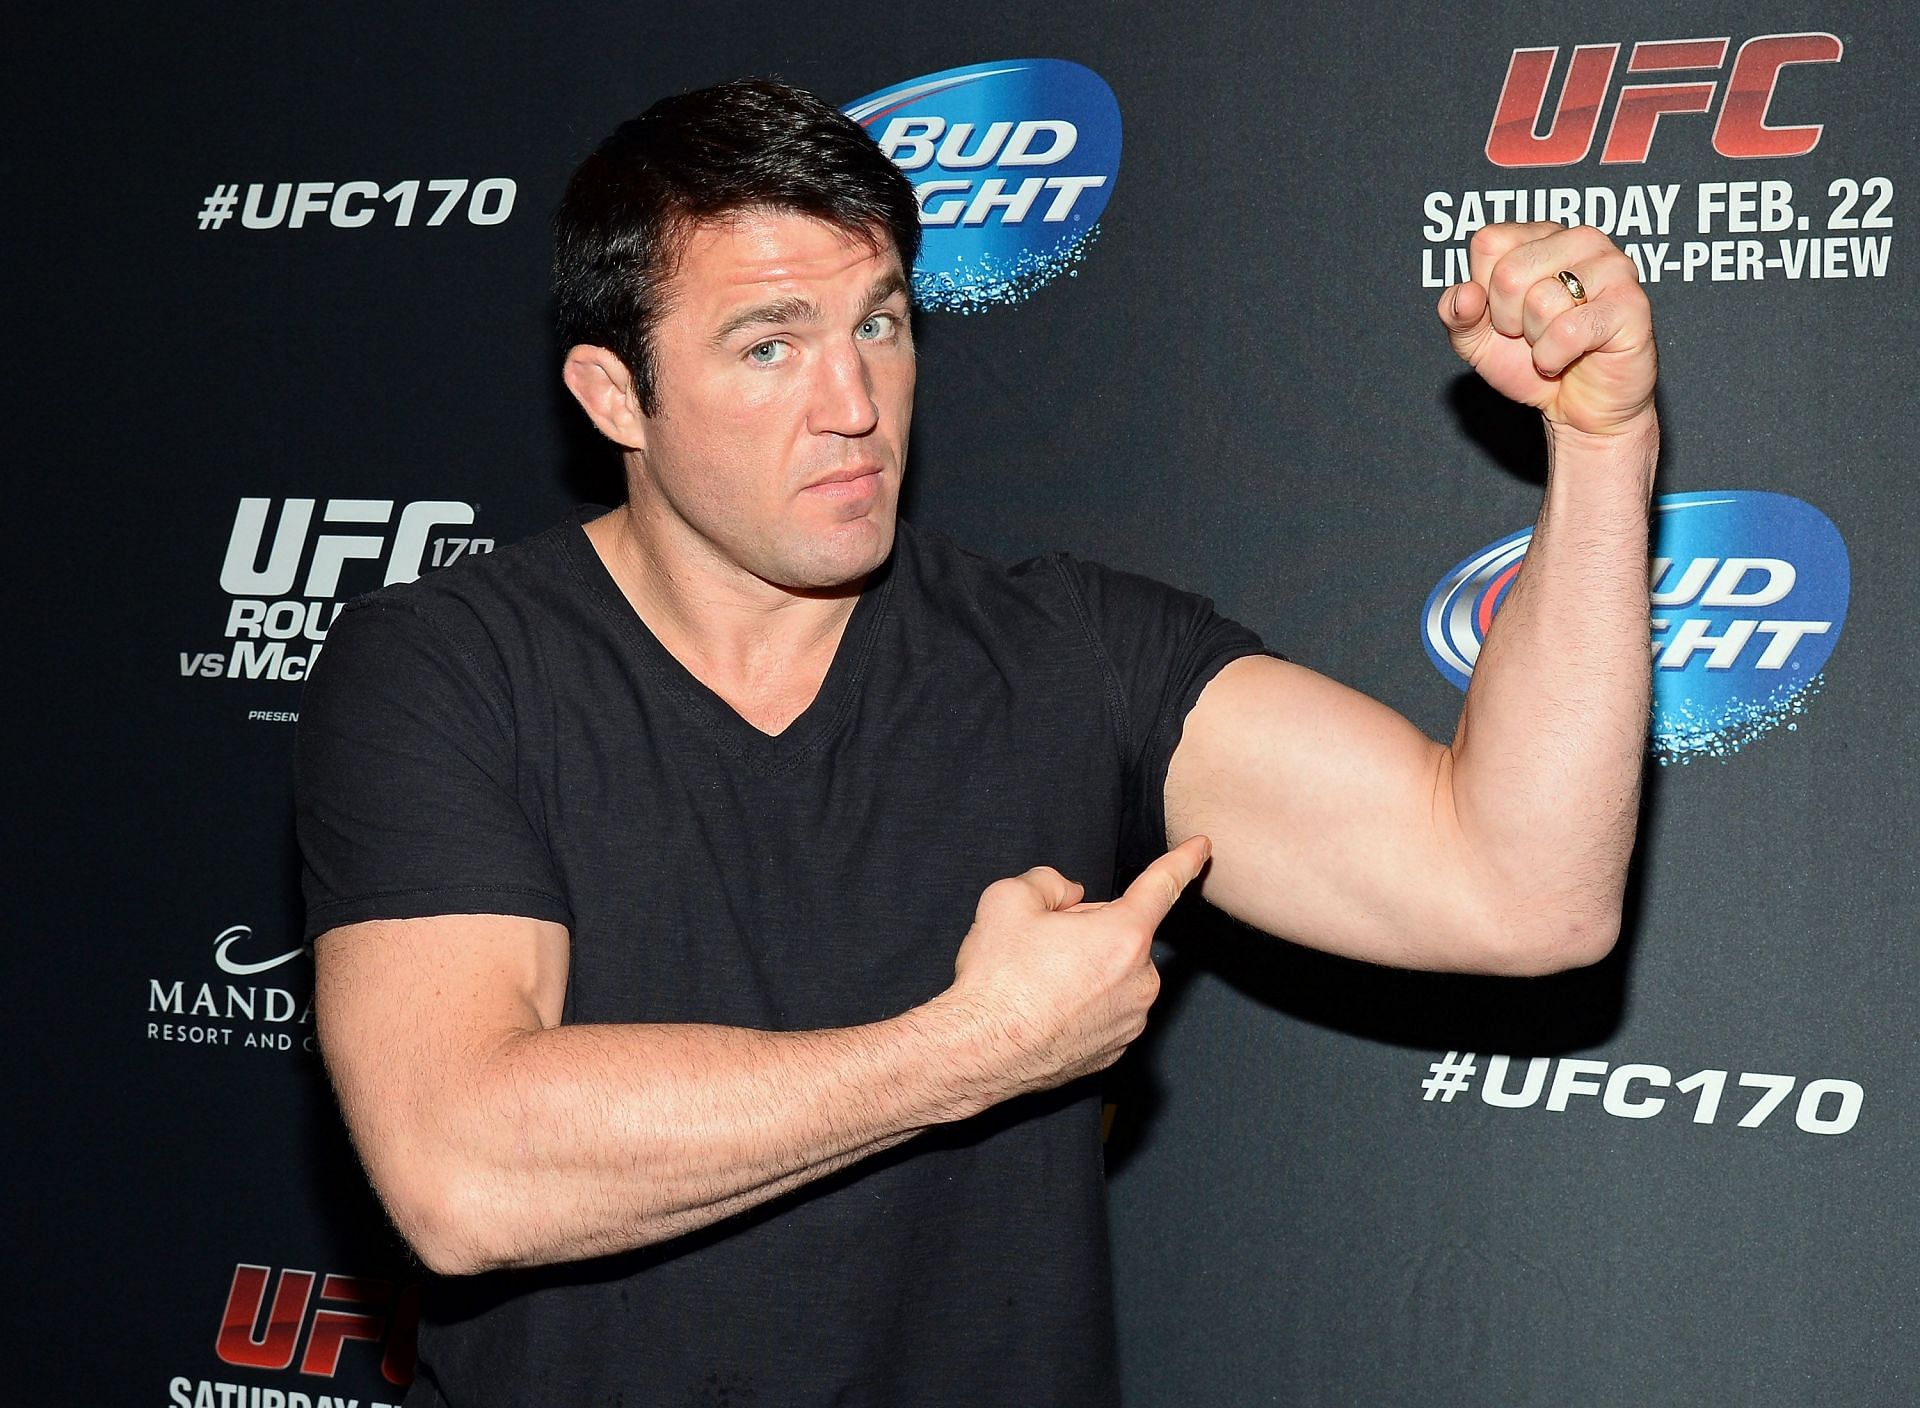 Chael Sonnen&#039;s microphone work made him a sensation - and a major heel, too